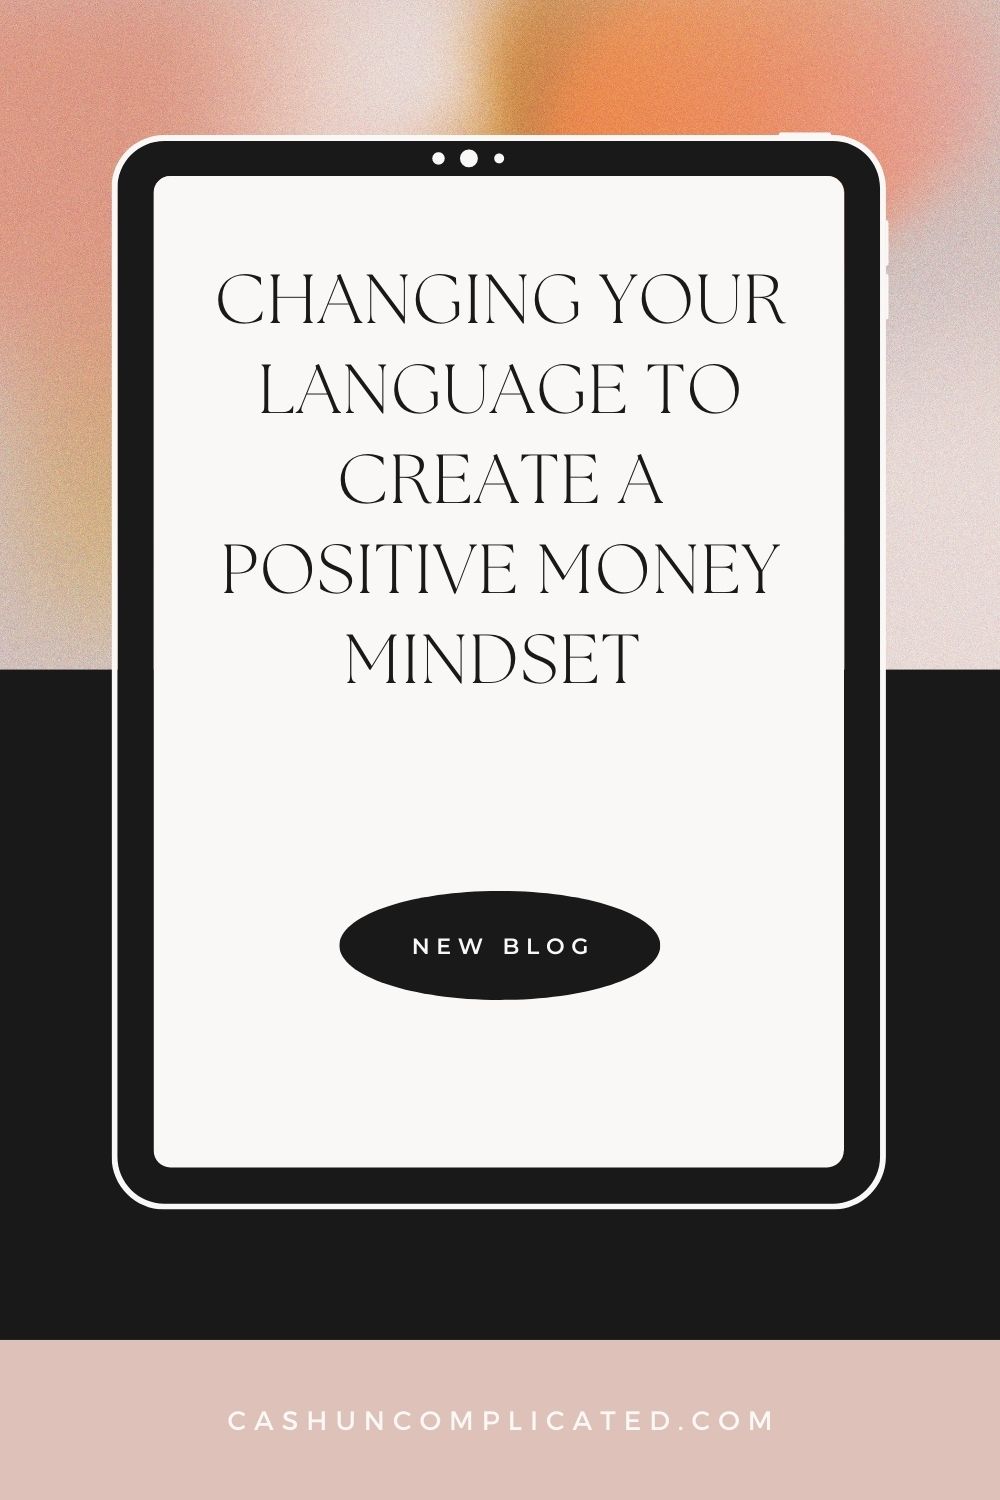 Changing Language for a more positive money mindset